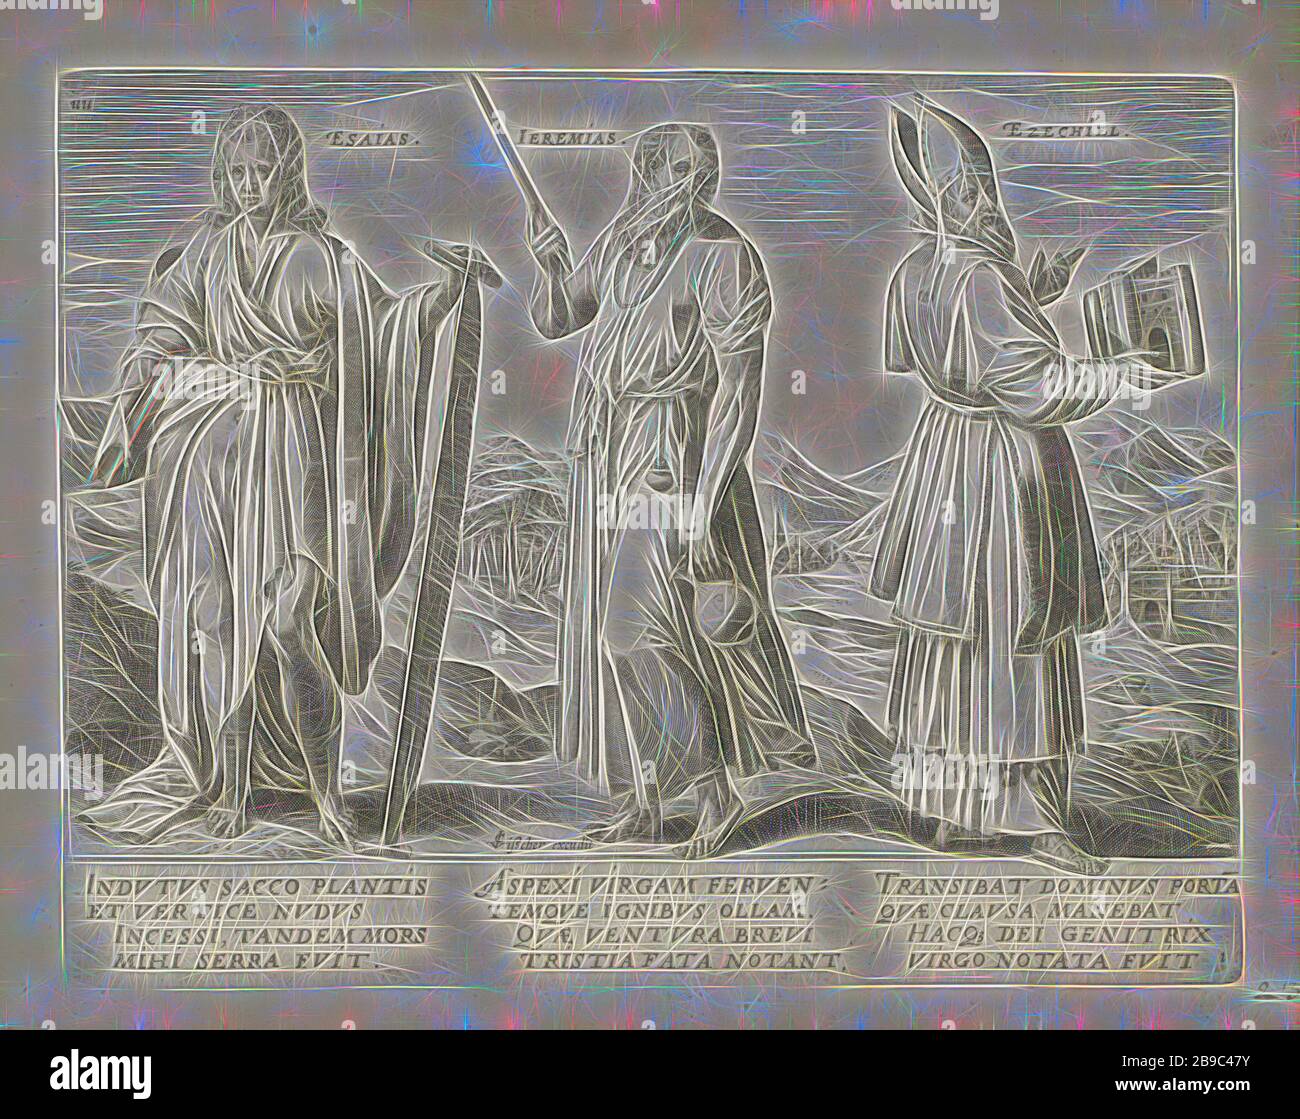 Isaiah, Jeremiah and Ezekiel From the Prophets (series title) Twelve prophets (series title) Den Grooten Figuer-Bibel (...) (series title), The prophets Isaiah, Jeremiah and Ezekiel stand side by side in a landscape. Isaiah holds a book under his arm and holds a saw in his hand, Jeremiah holds a staff and jug, Ezekiel holds the temple in his hand, which he saw in a vision. Below the show explanations in Latin. This print is part of an album, the four major prophets (not in a biblical context): Isaiah, Jeremiah, Ezekiel, Daniel, Isaiah (not in a biblical context), possible attributes: branch wi Stock Photo